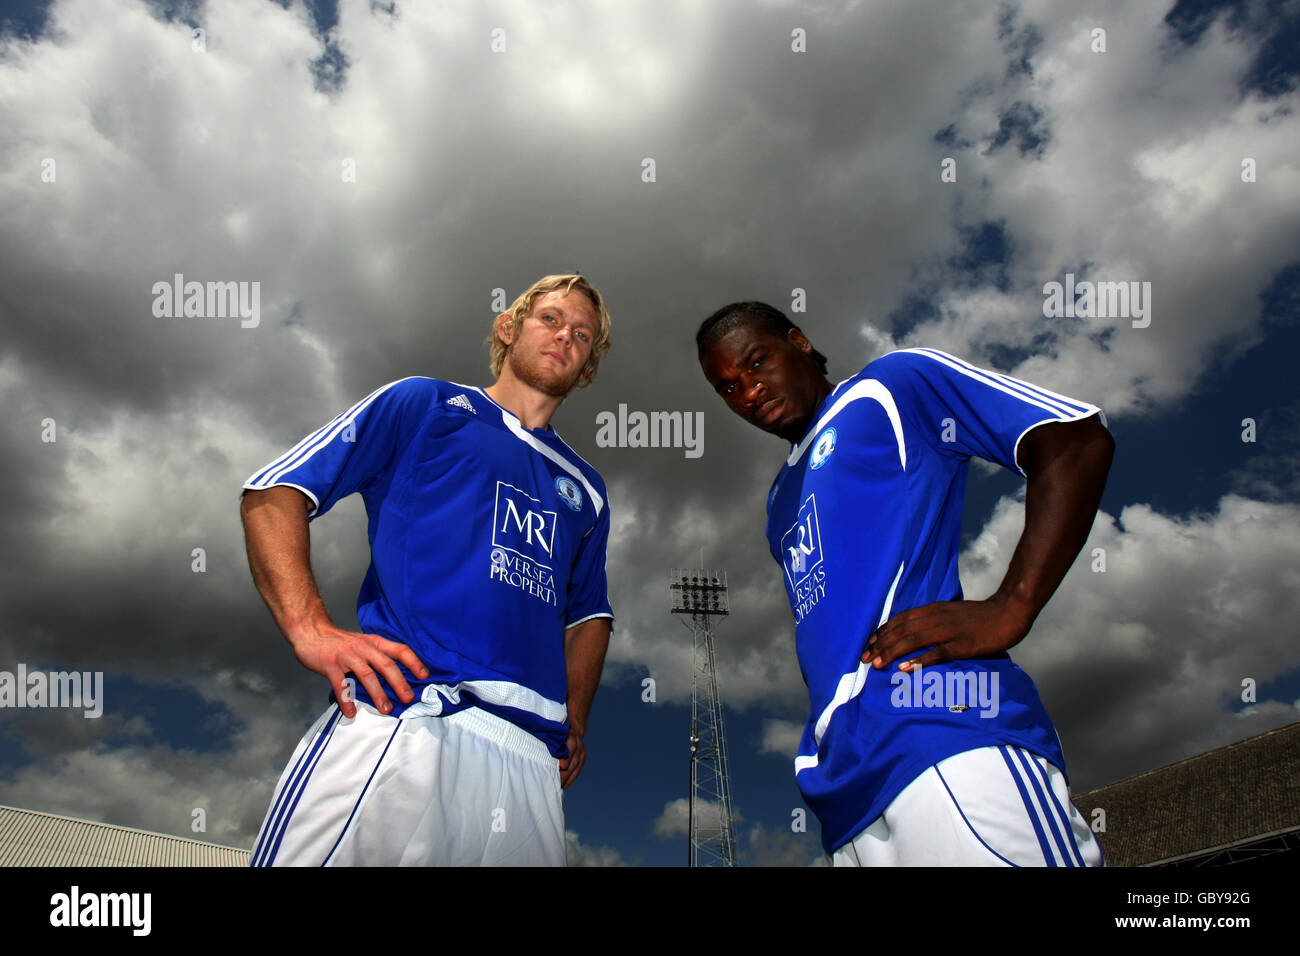 Soccer football league championship peterborough united photocall